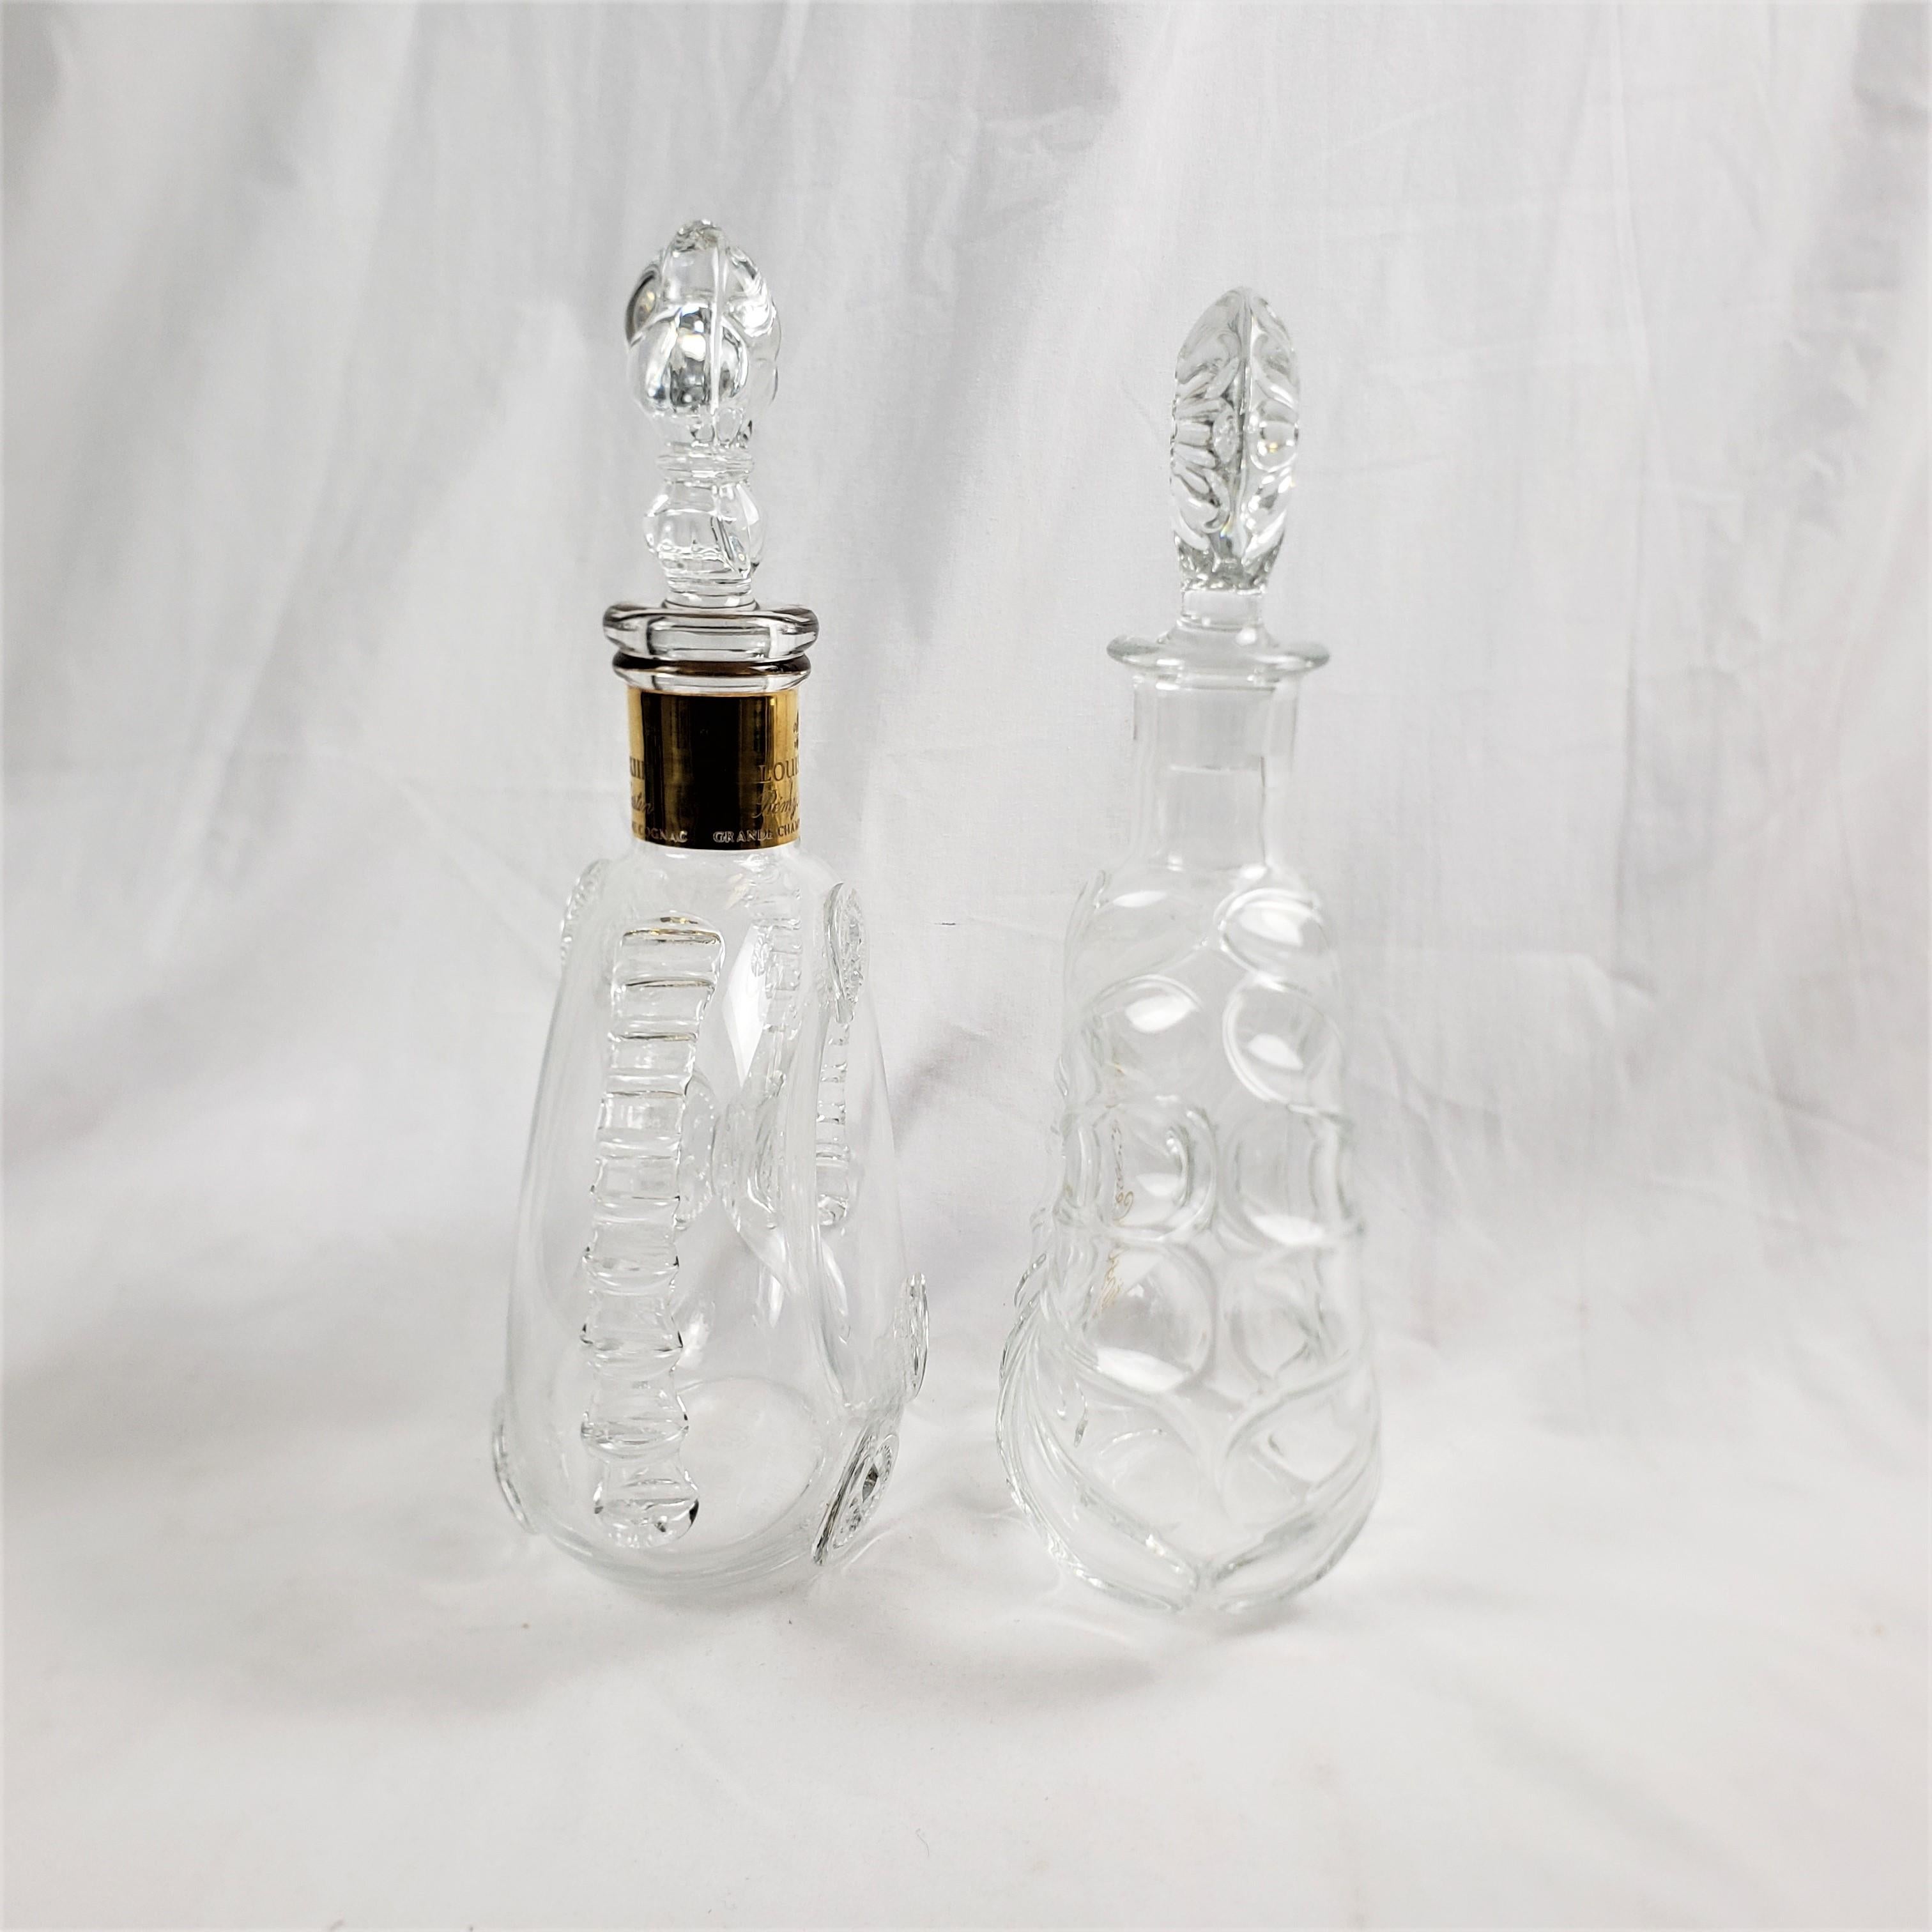 Louis XIII Pair of Baccarat Crystal Mid-Century Remy Martin Liquor Bottles or Decanters For Sale